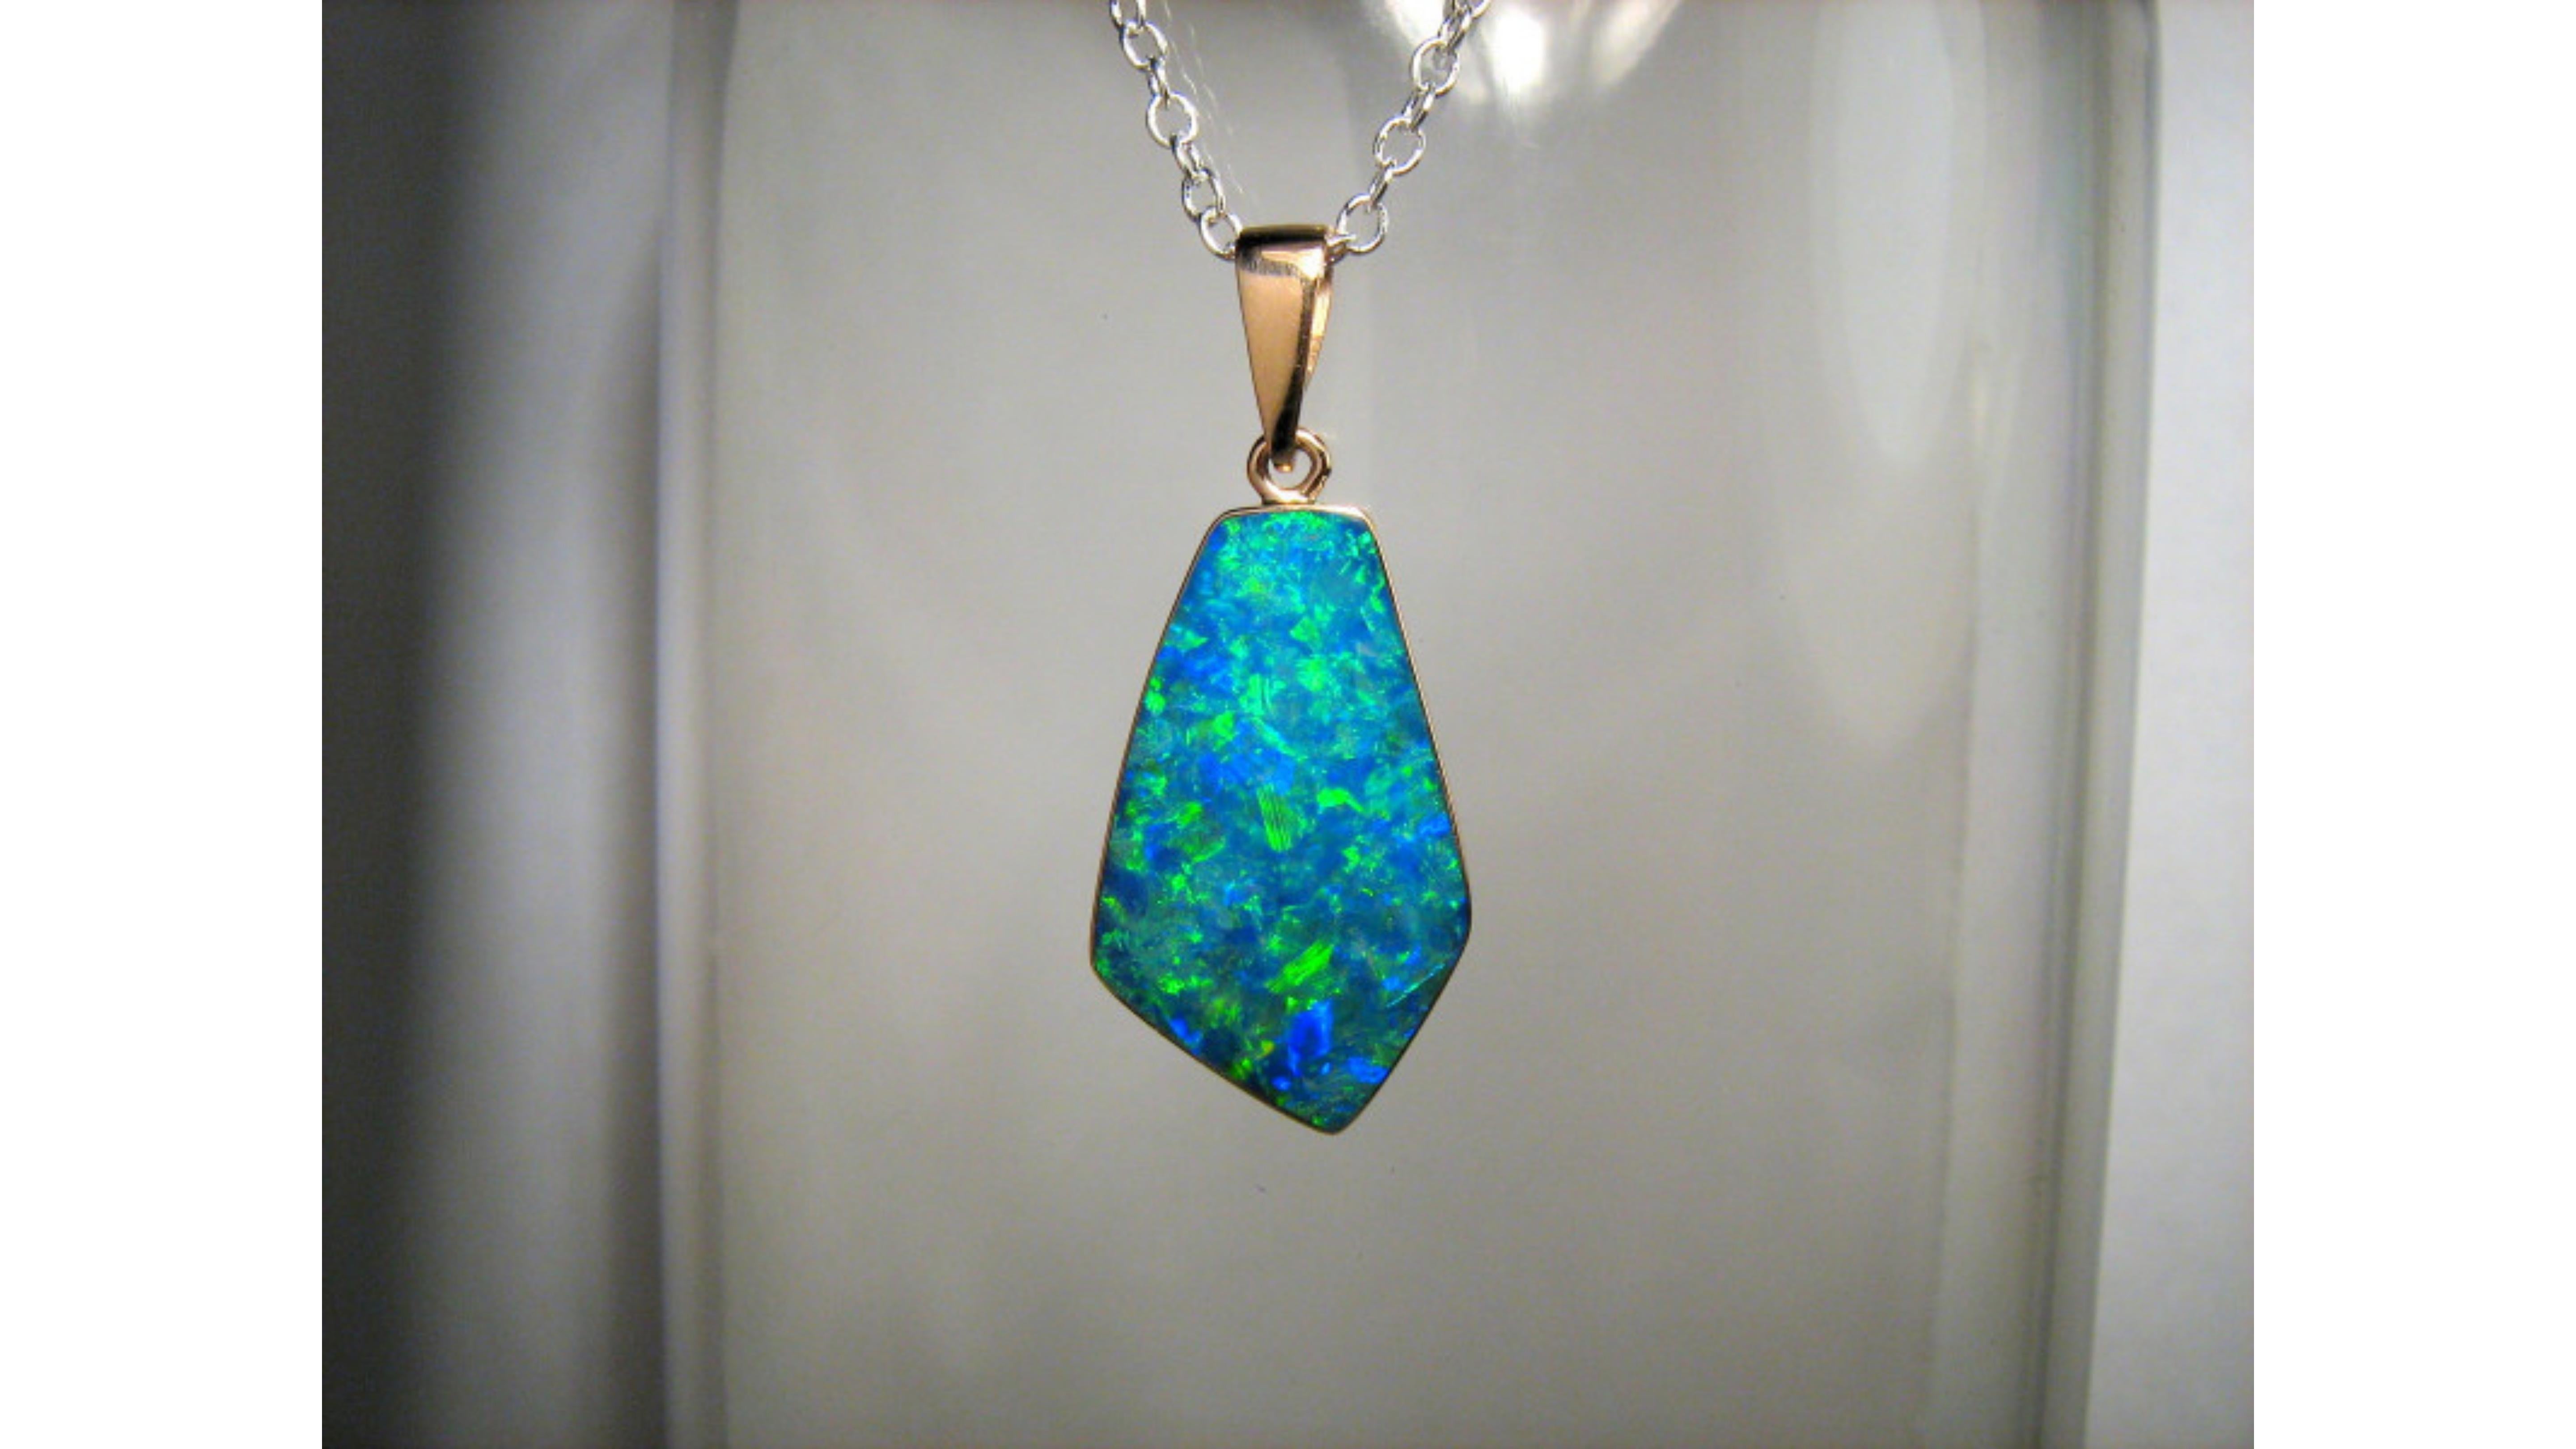 7.2 Carat  Australian Opal Necklace Sterling Silver  . This shows off bright colors  Blue Green Yellow  and comes from Coober Pedy South Australia .    If you are looking for anything specific  let us know  as we might have or can have it made.